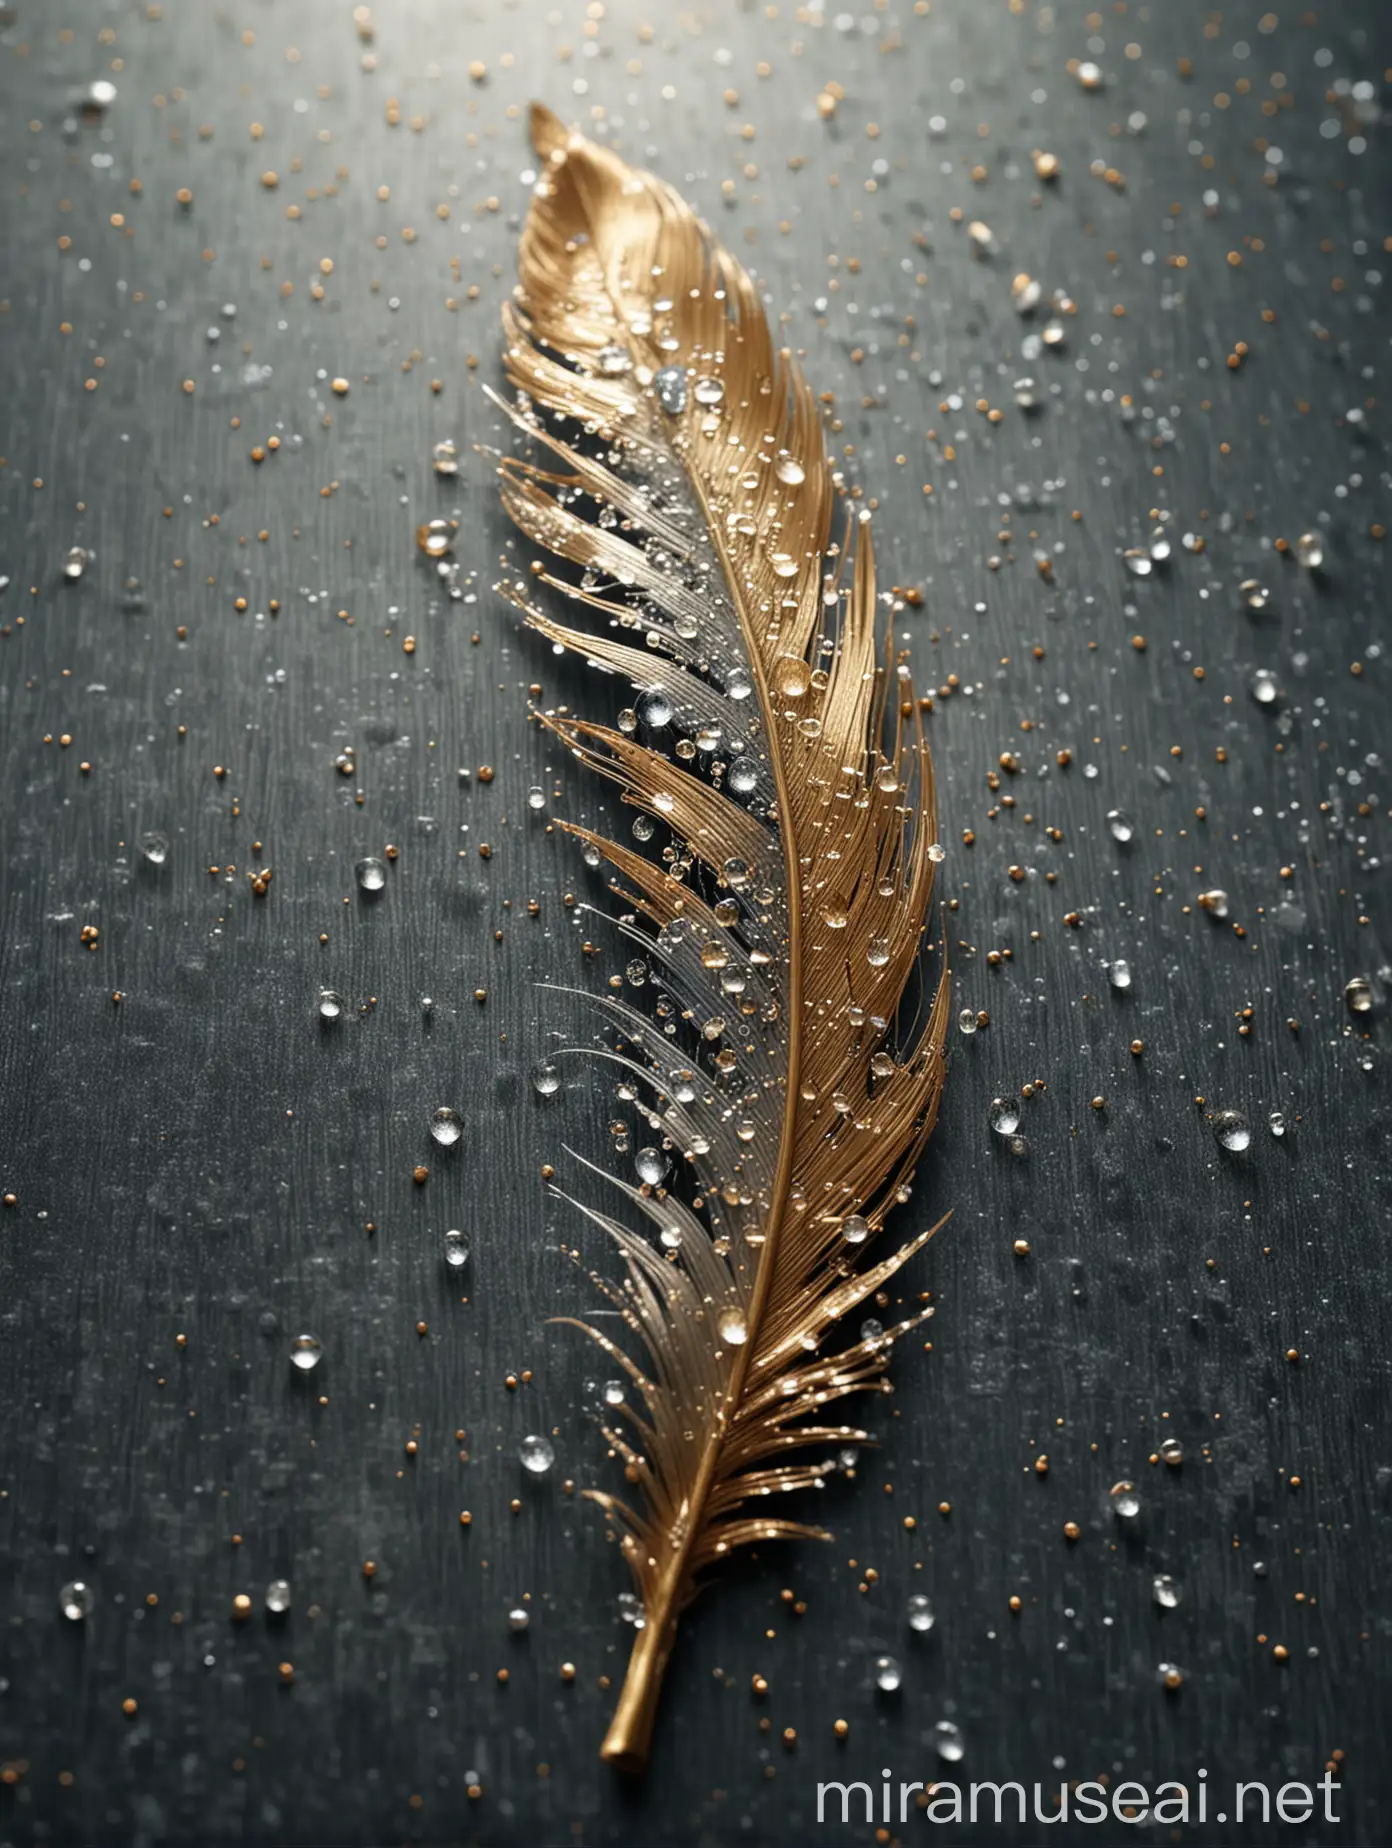 Gilded Feather with Dewdrops Stunning 8K Wallpaper of Exquisite Nature